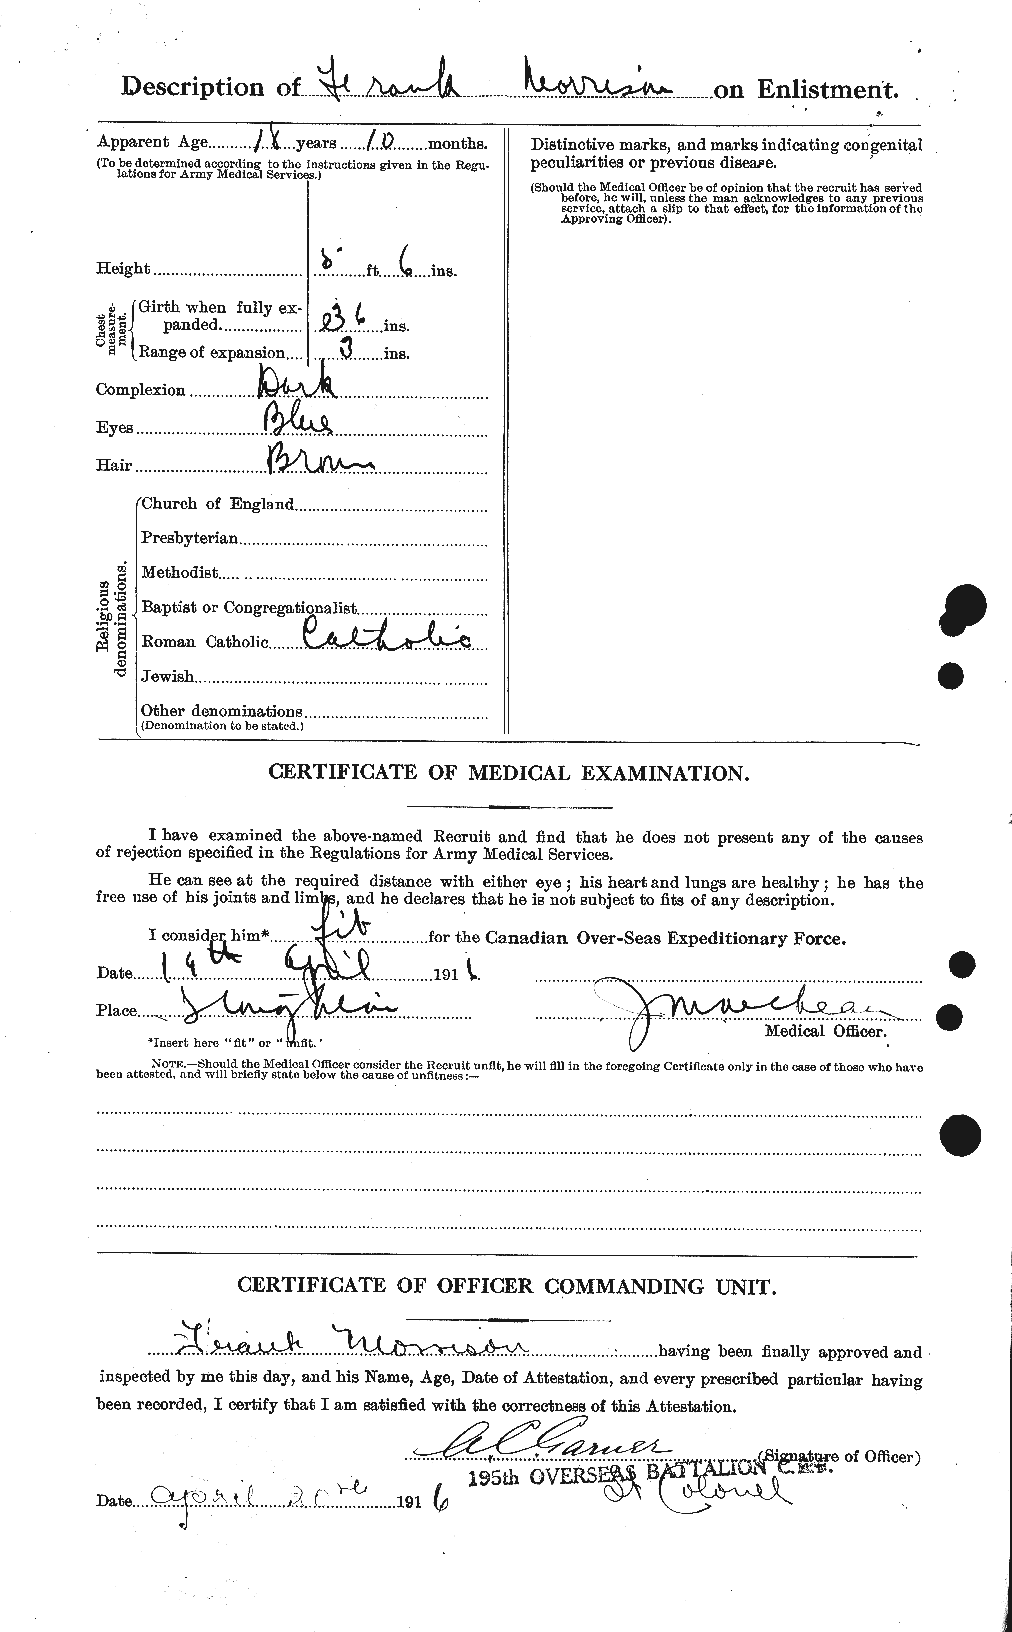 Personnel Records of the First World War - CEF 505543b